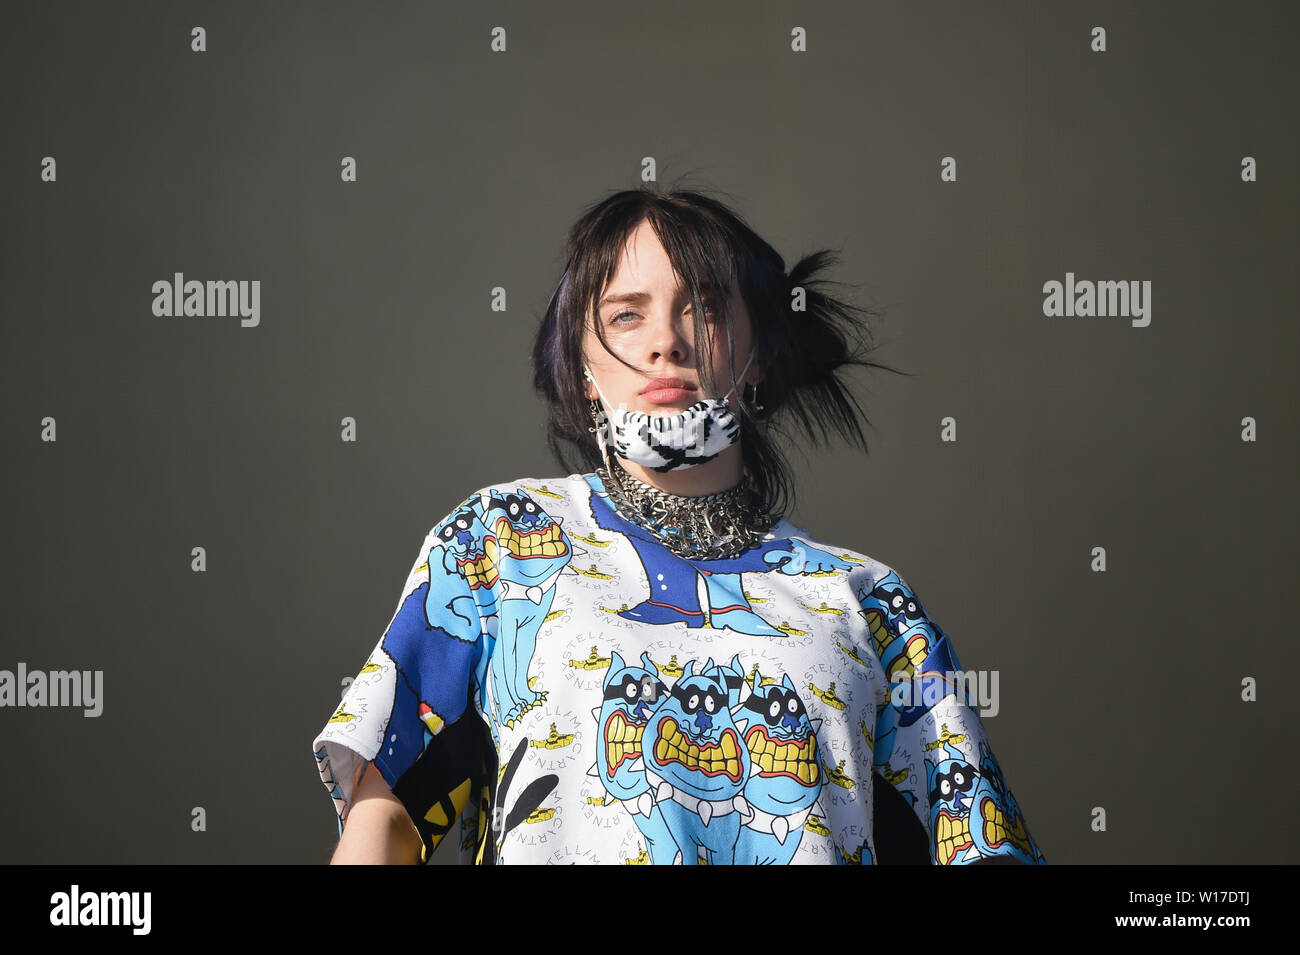 Glastonbury, Pilton, Somerset, UK. 30th June 2019. Billie Eilish performs on the Other stage at Glastonbury Festival on 30th June 2019. Picture by Tabatha Fireman / Female Perspective Credit: Female Perspective/Alamy Live News Stock Photo